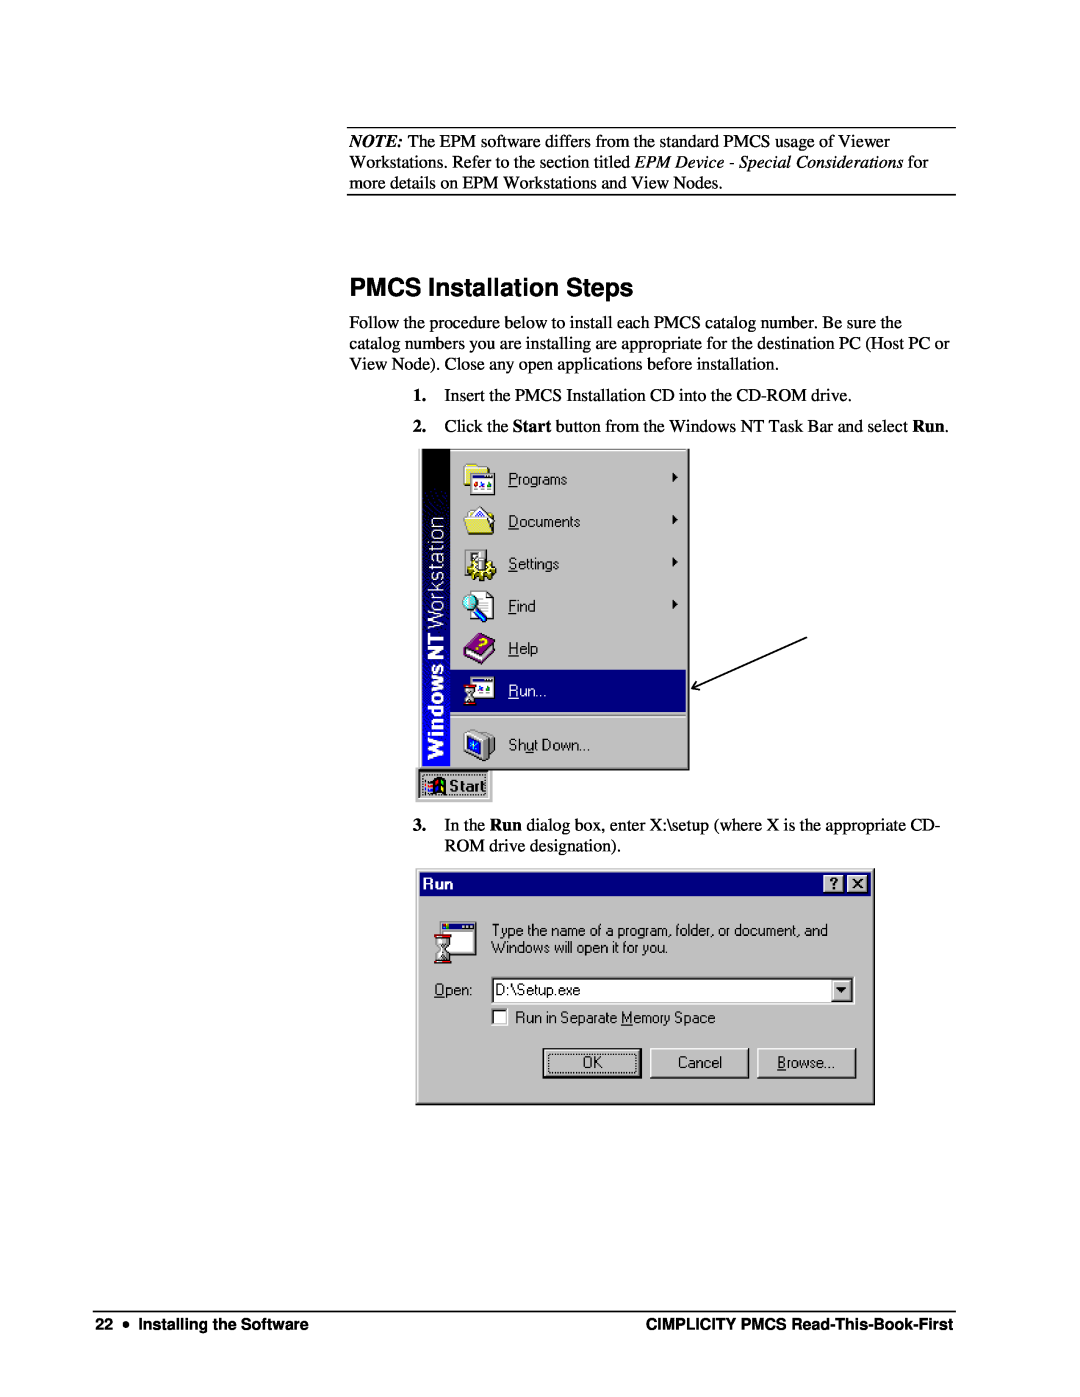 GE DEH-211 manual PMCS Installation Steps, Installing the Software, CIMPLICITY PMCS Read-This-Book-First 